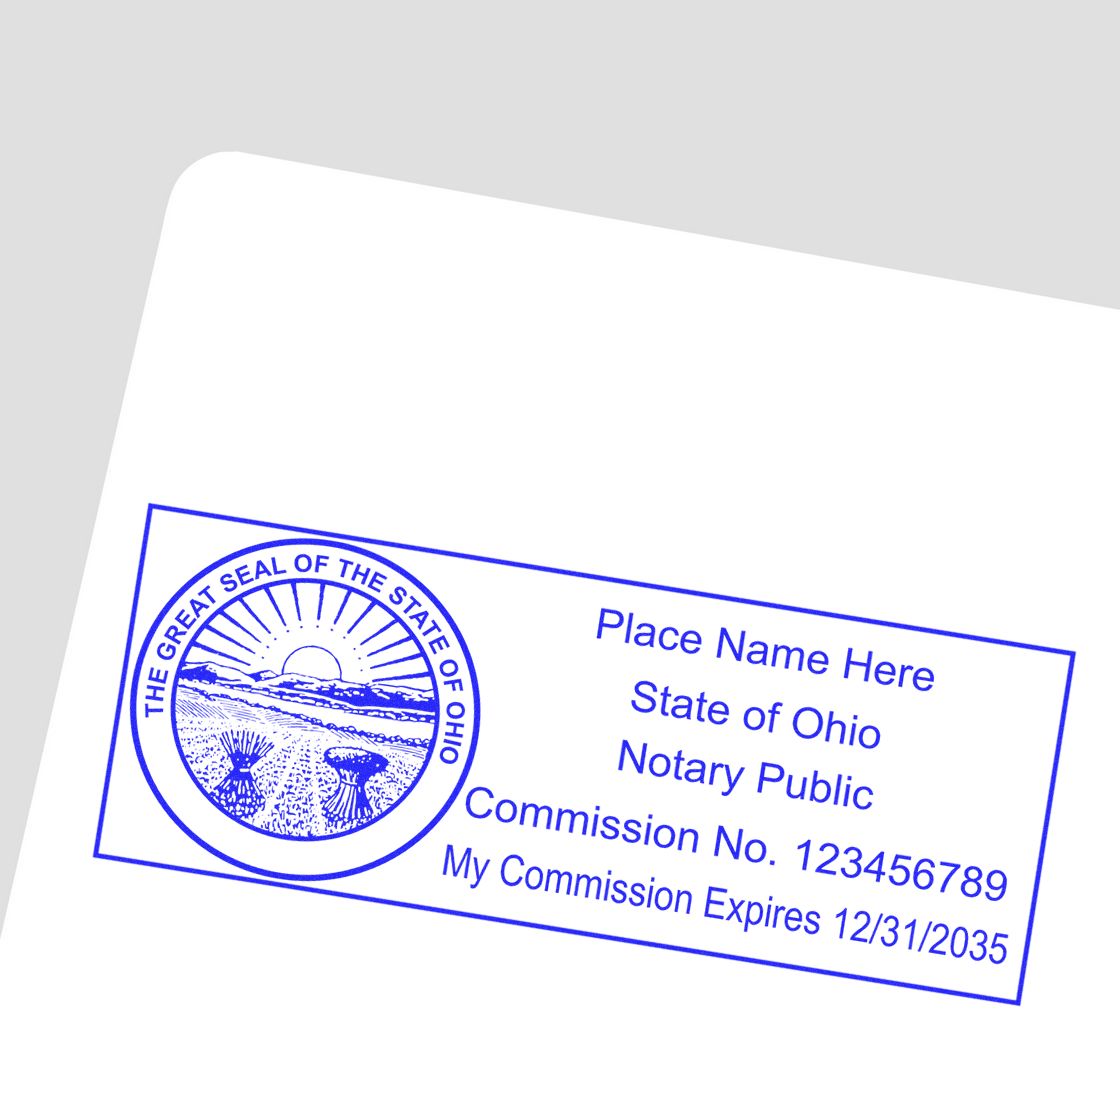 Slim Pre-Inked State Seal Notary Stamp for Ohio in use photo showing a stamped imprint of the Slim Pre-Inked State Seal Notary Stamp for Ohio